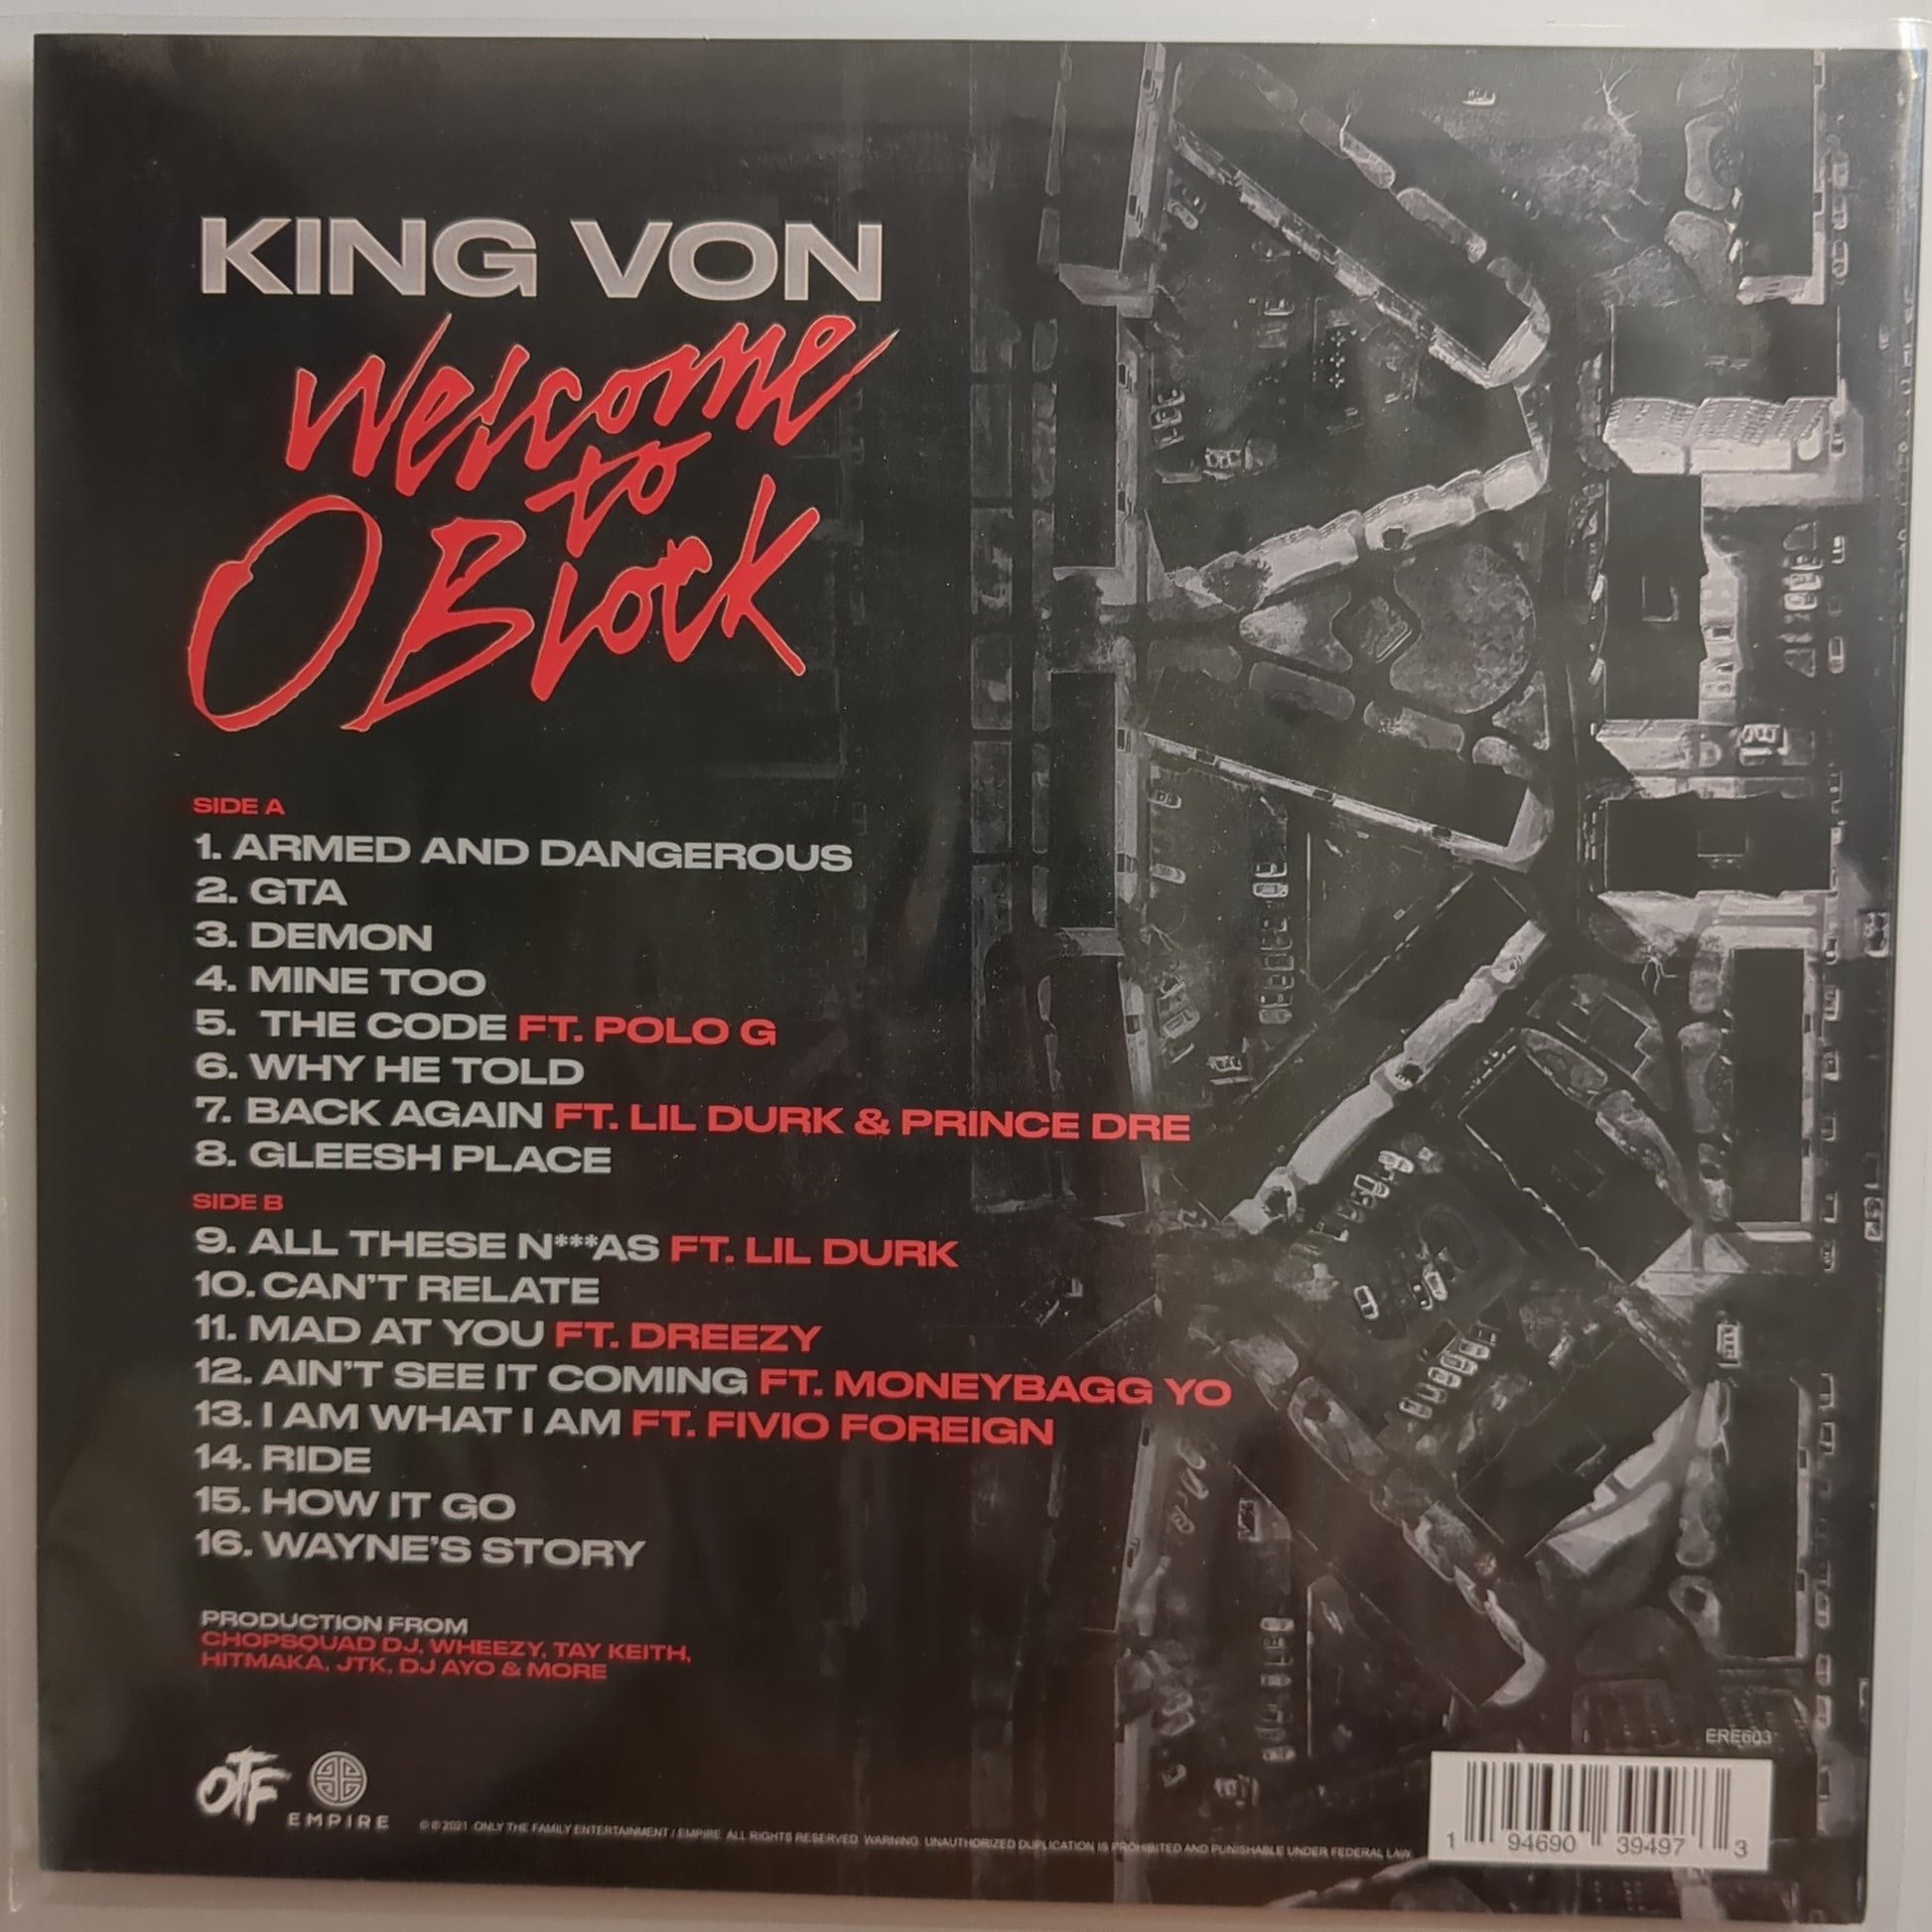 Welcome to O'Block — King Von